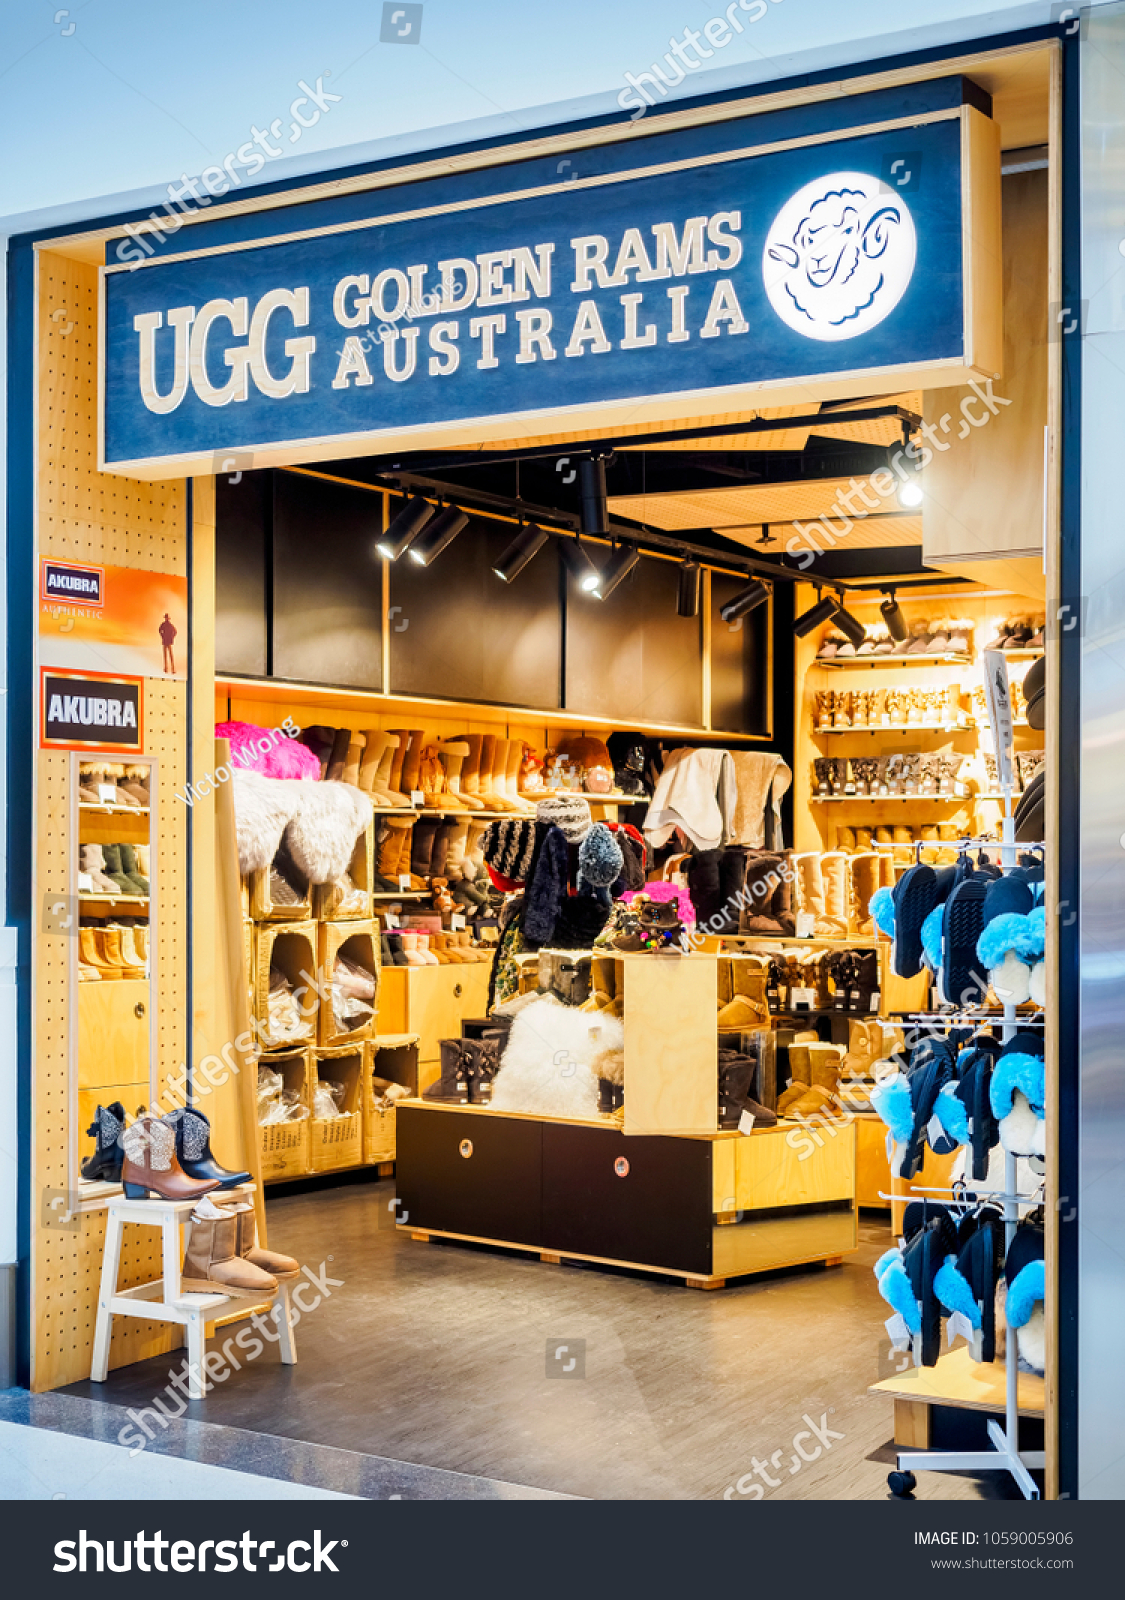 what shops sell ugg boots